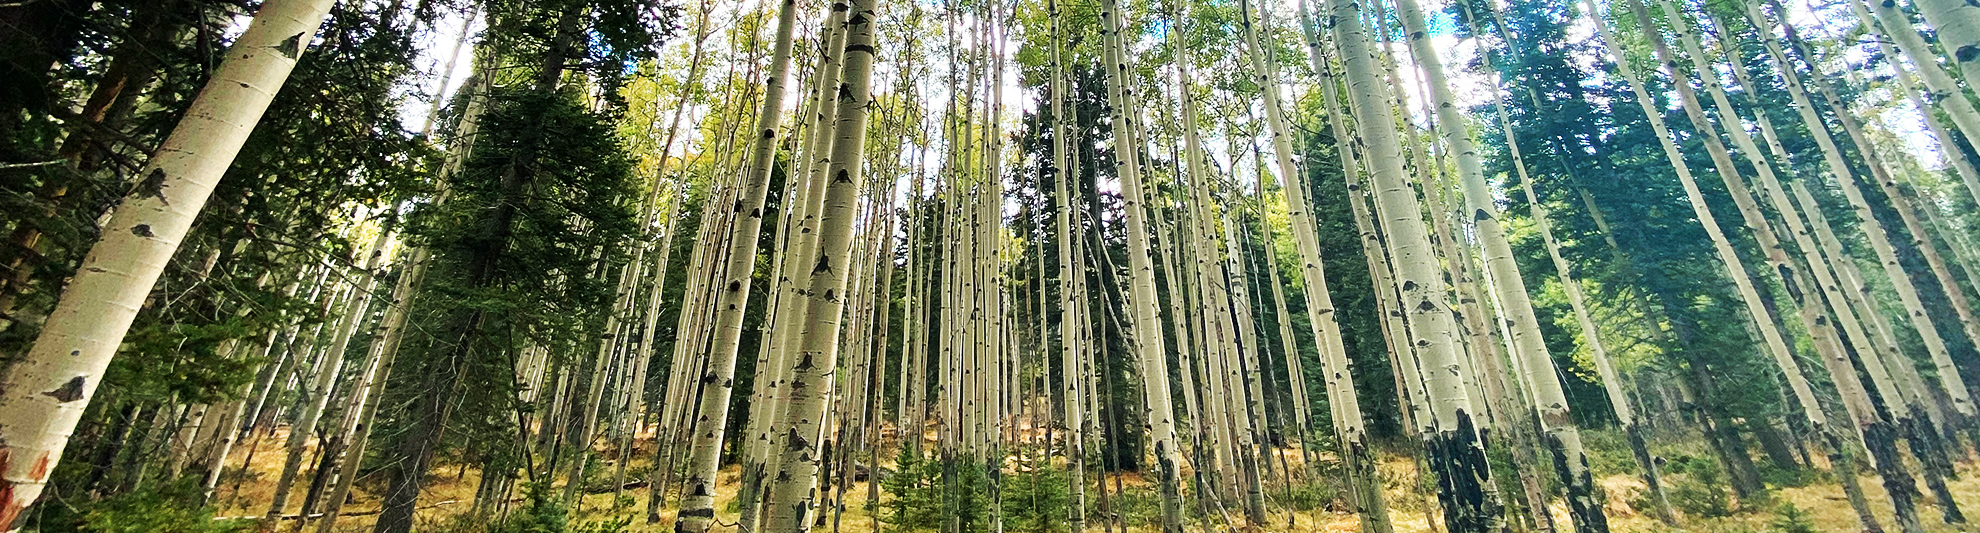 image of forrest trees in red river, new mexico